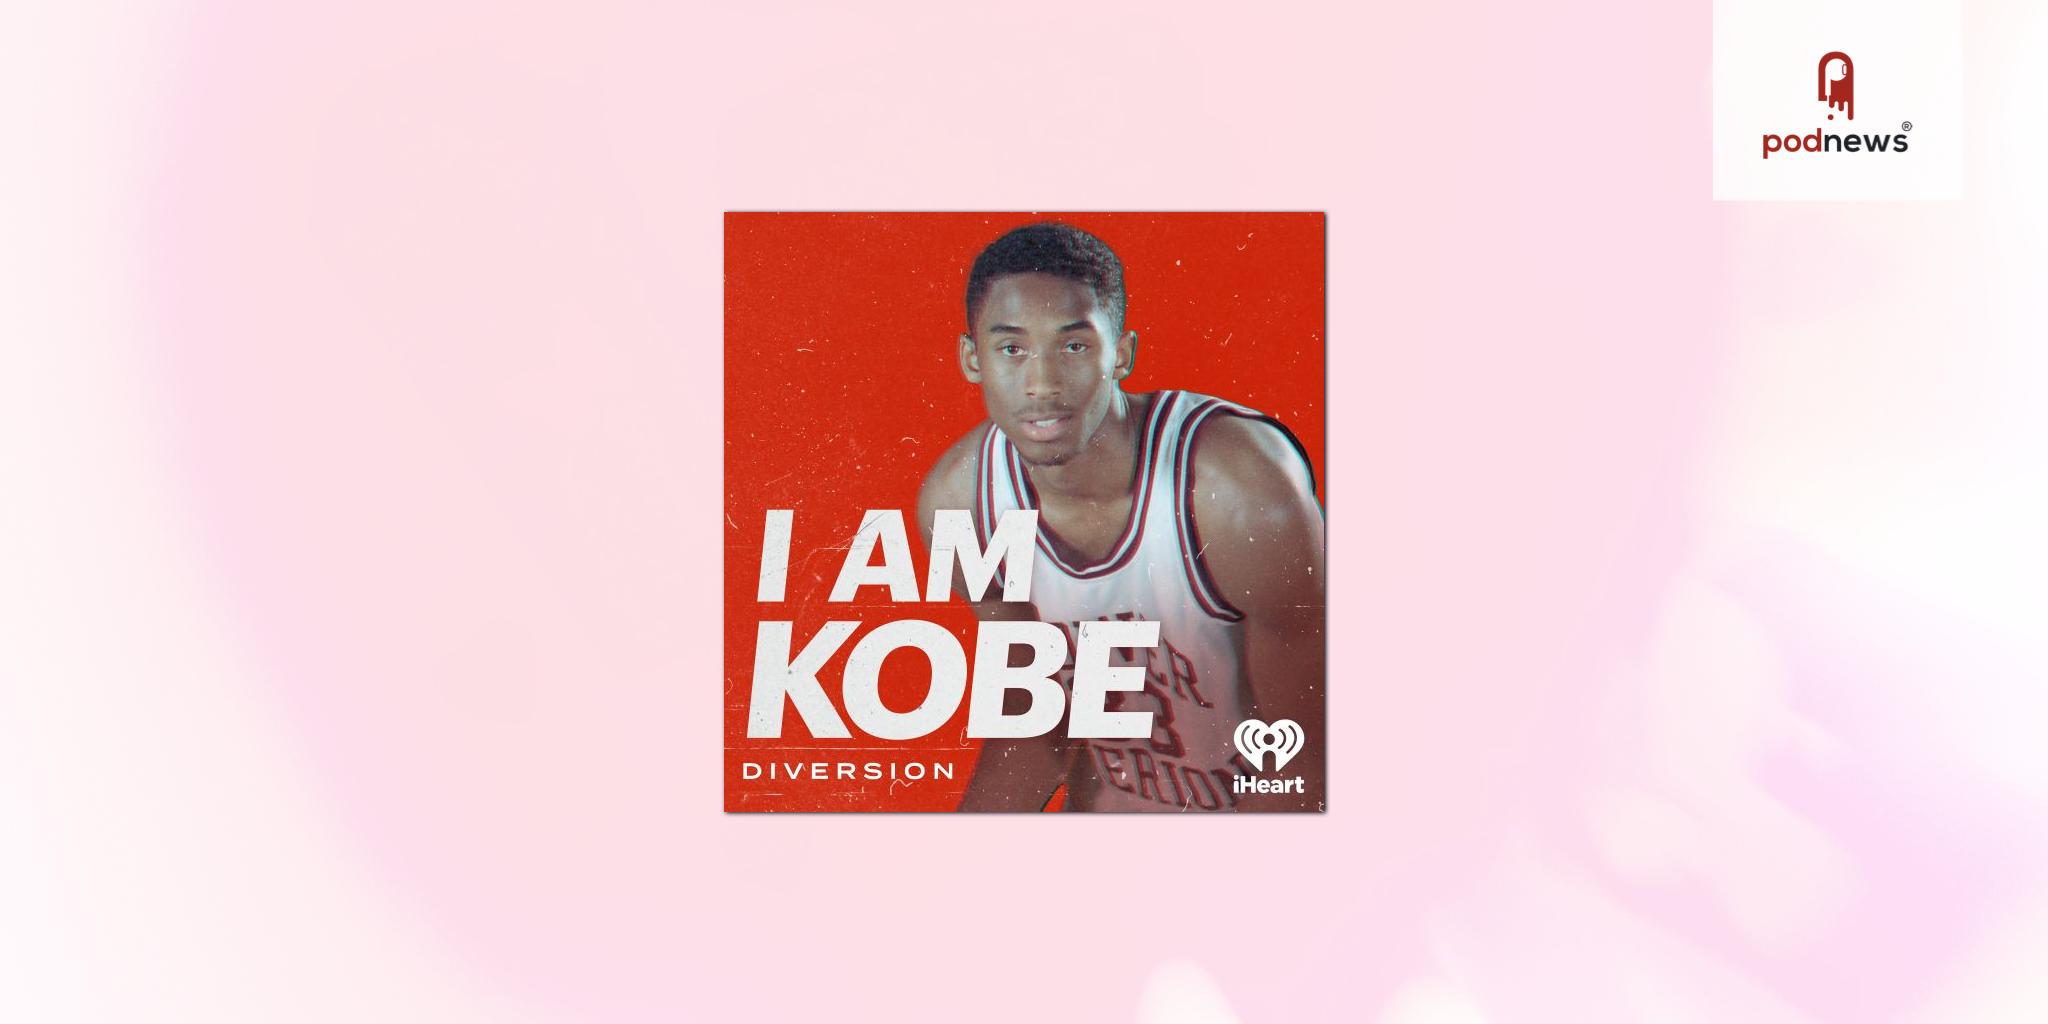 Diversion Podcasts and iHeartRadio Launch New Podcast I AM KOBE Featuring Tapes of Kobe Bryant as a teen